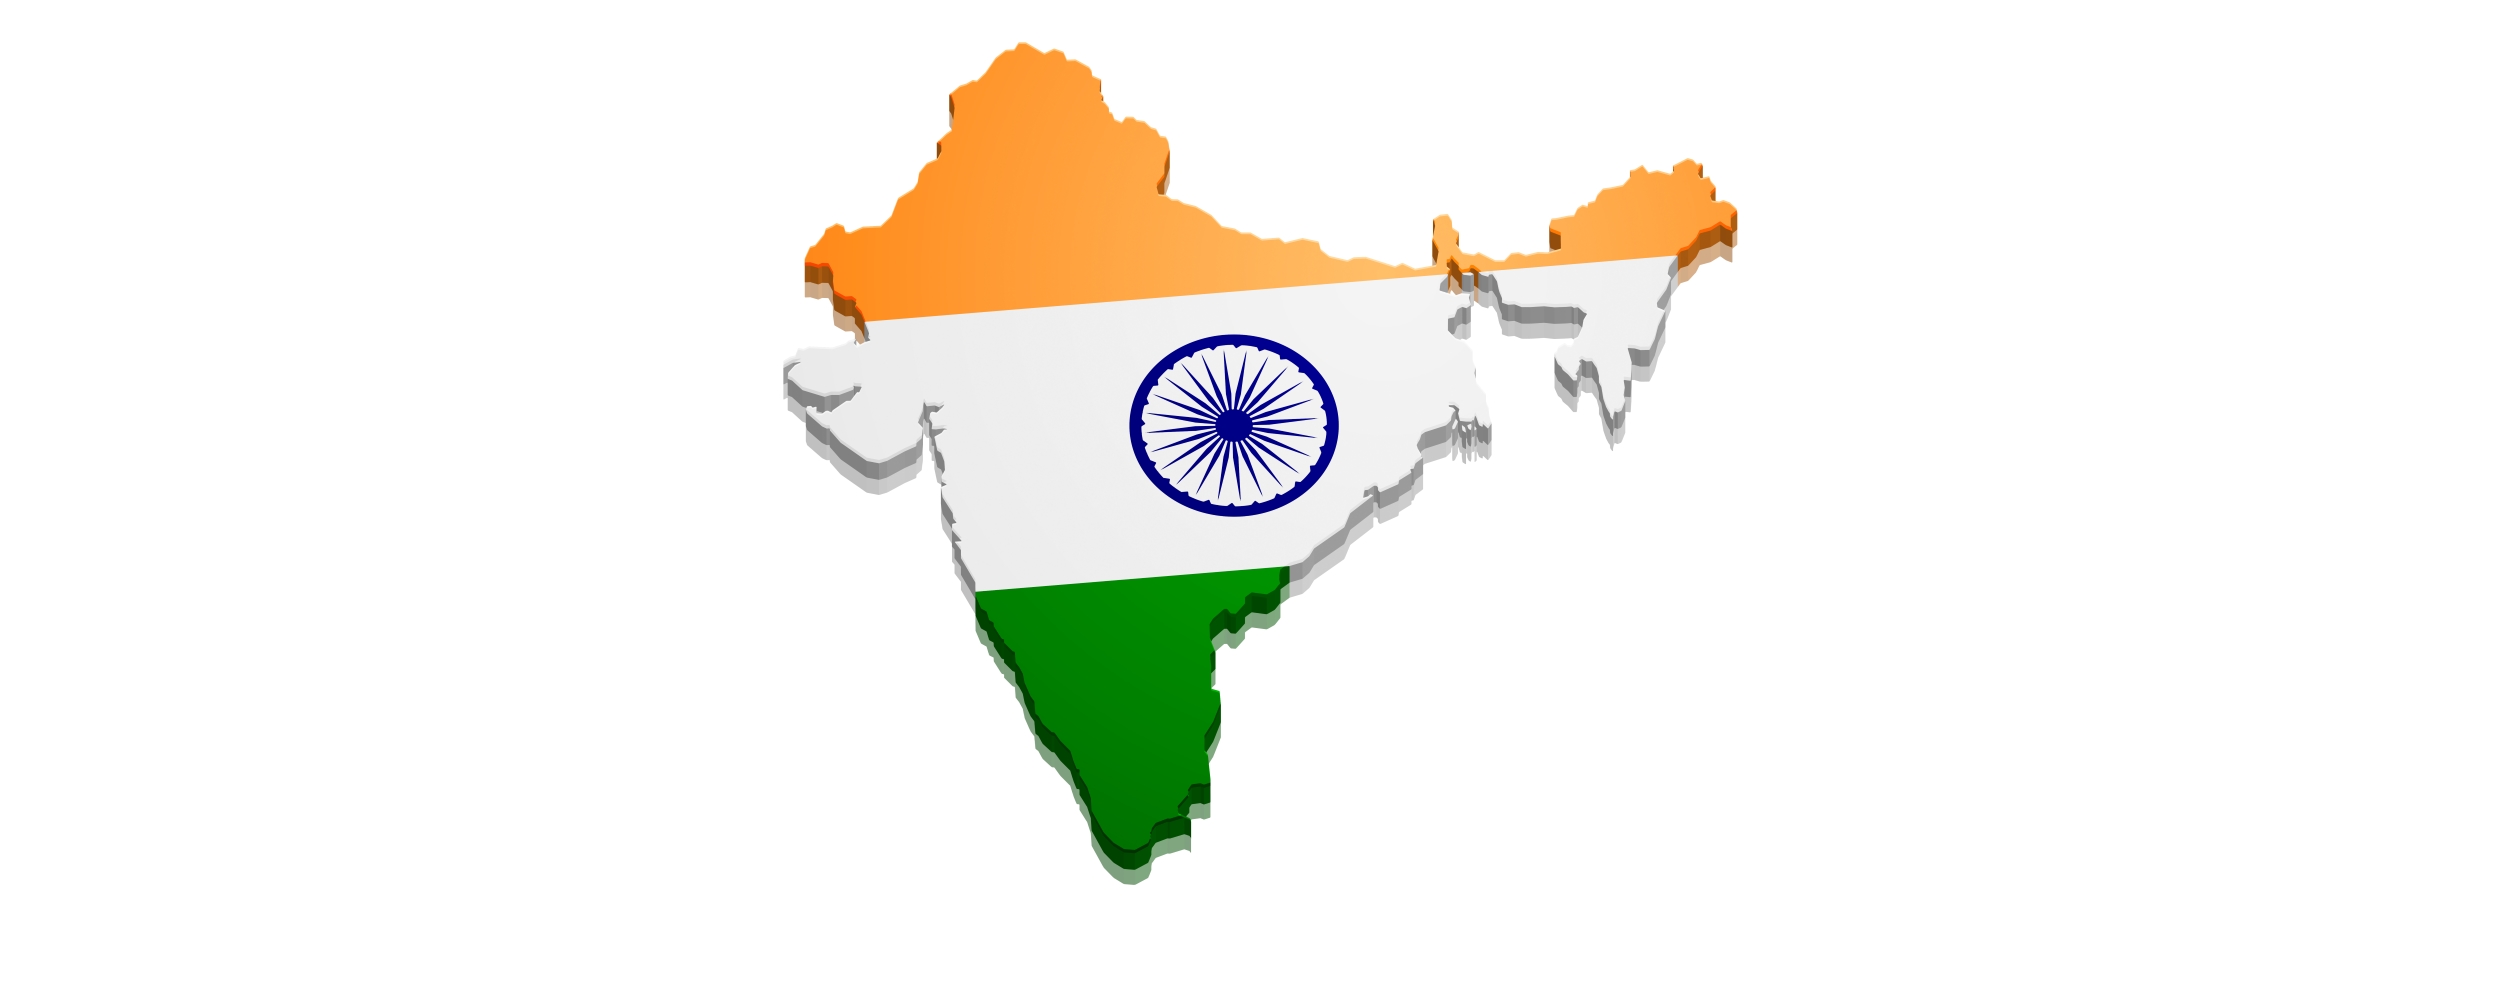 The Union Model of Indian Federalism